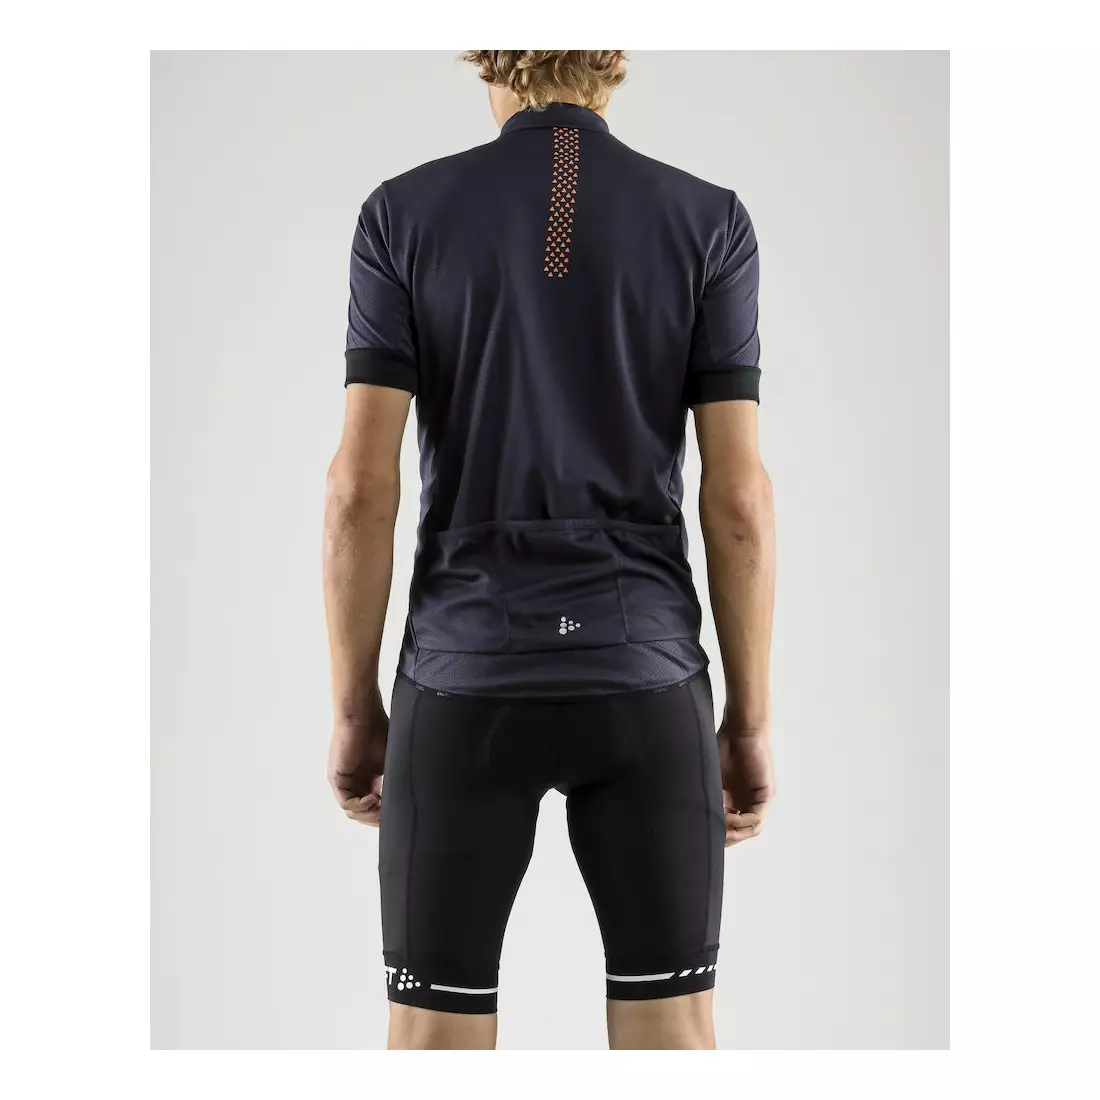 CRAFT RISE men's cycling jersey navy blue 1906097-947575